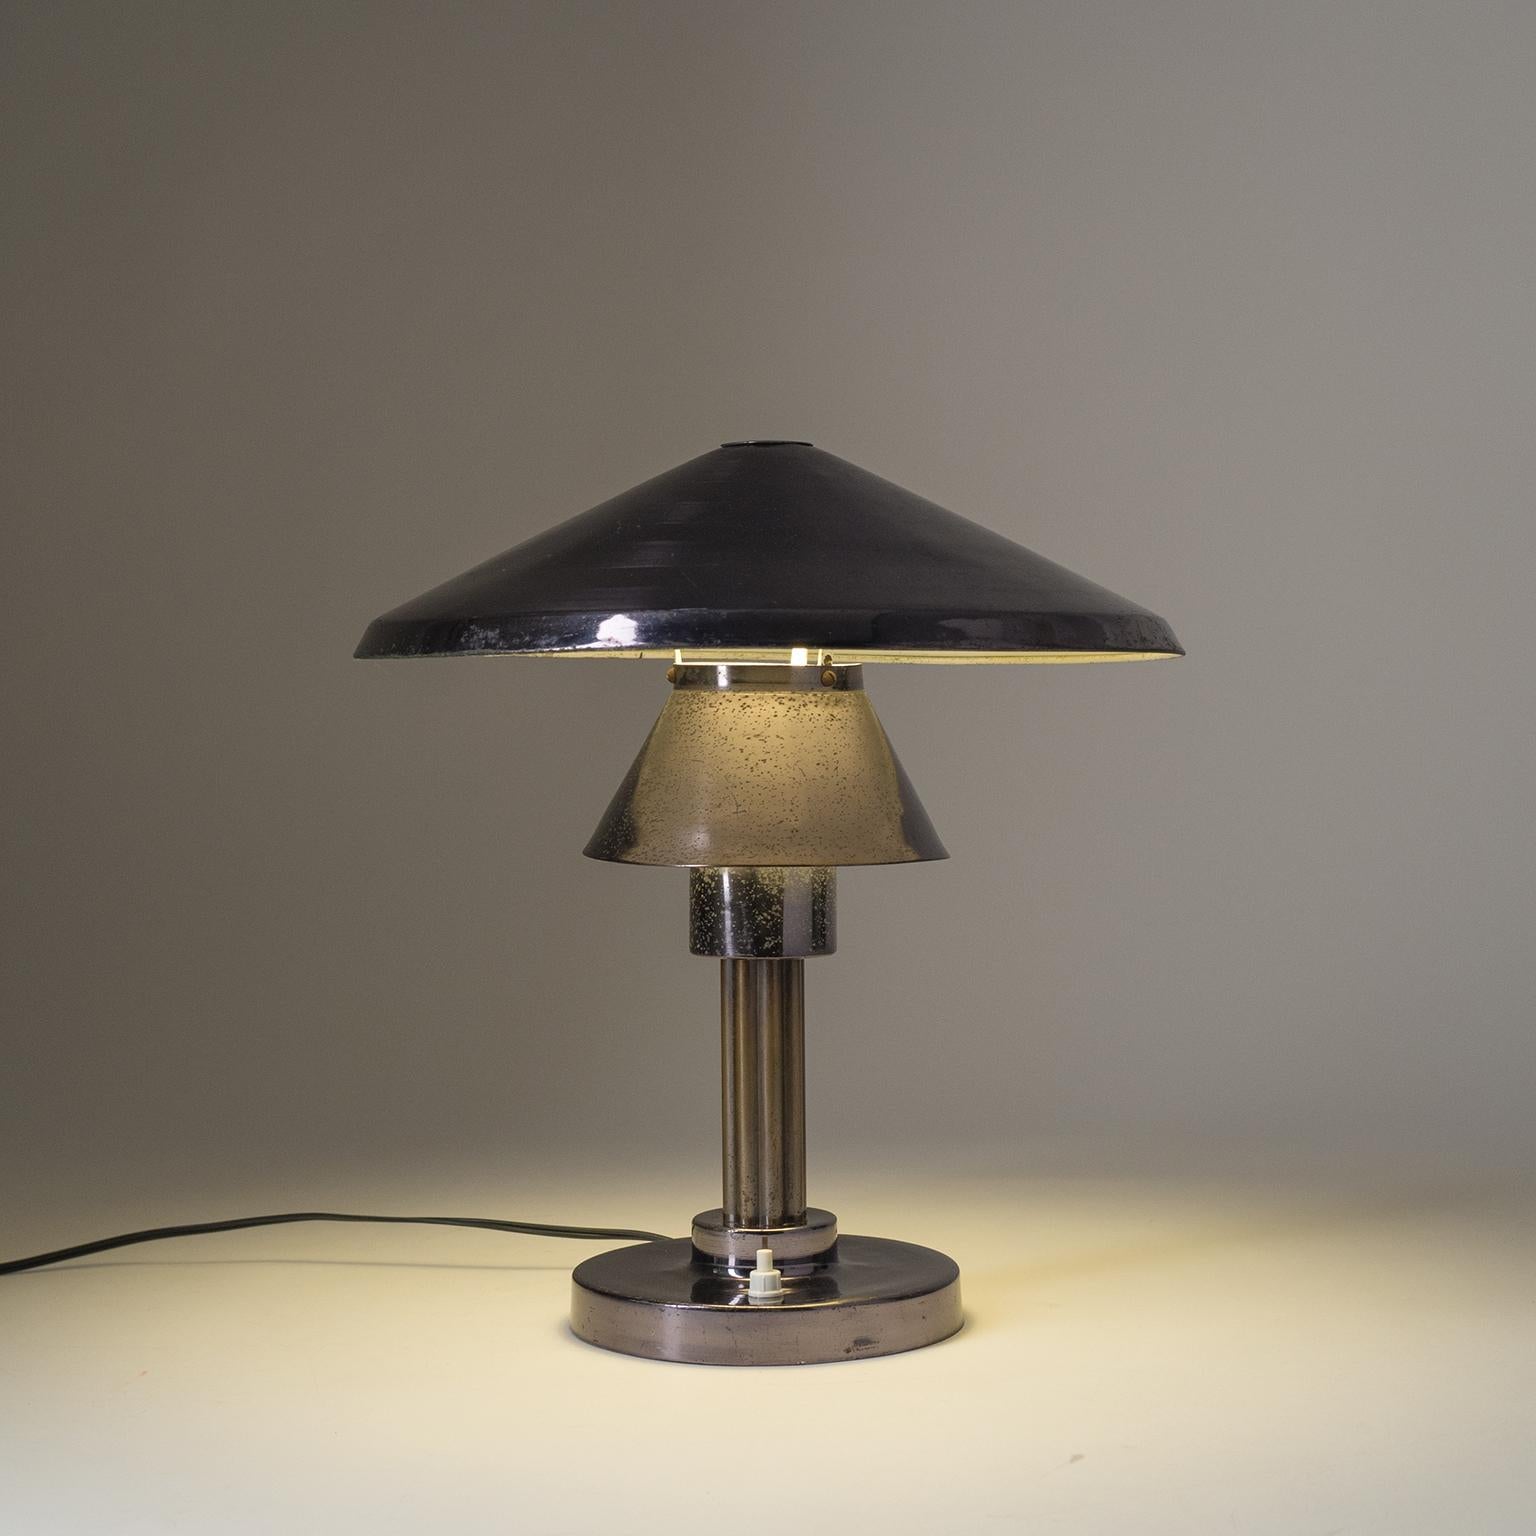 Italian Desk Lamp, 1950s, Patinated Nickel For Sale 8